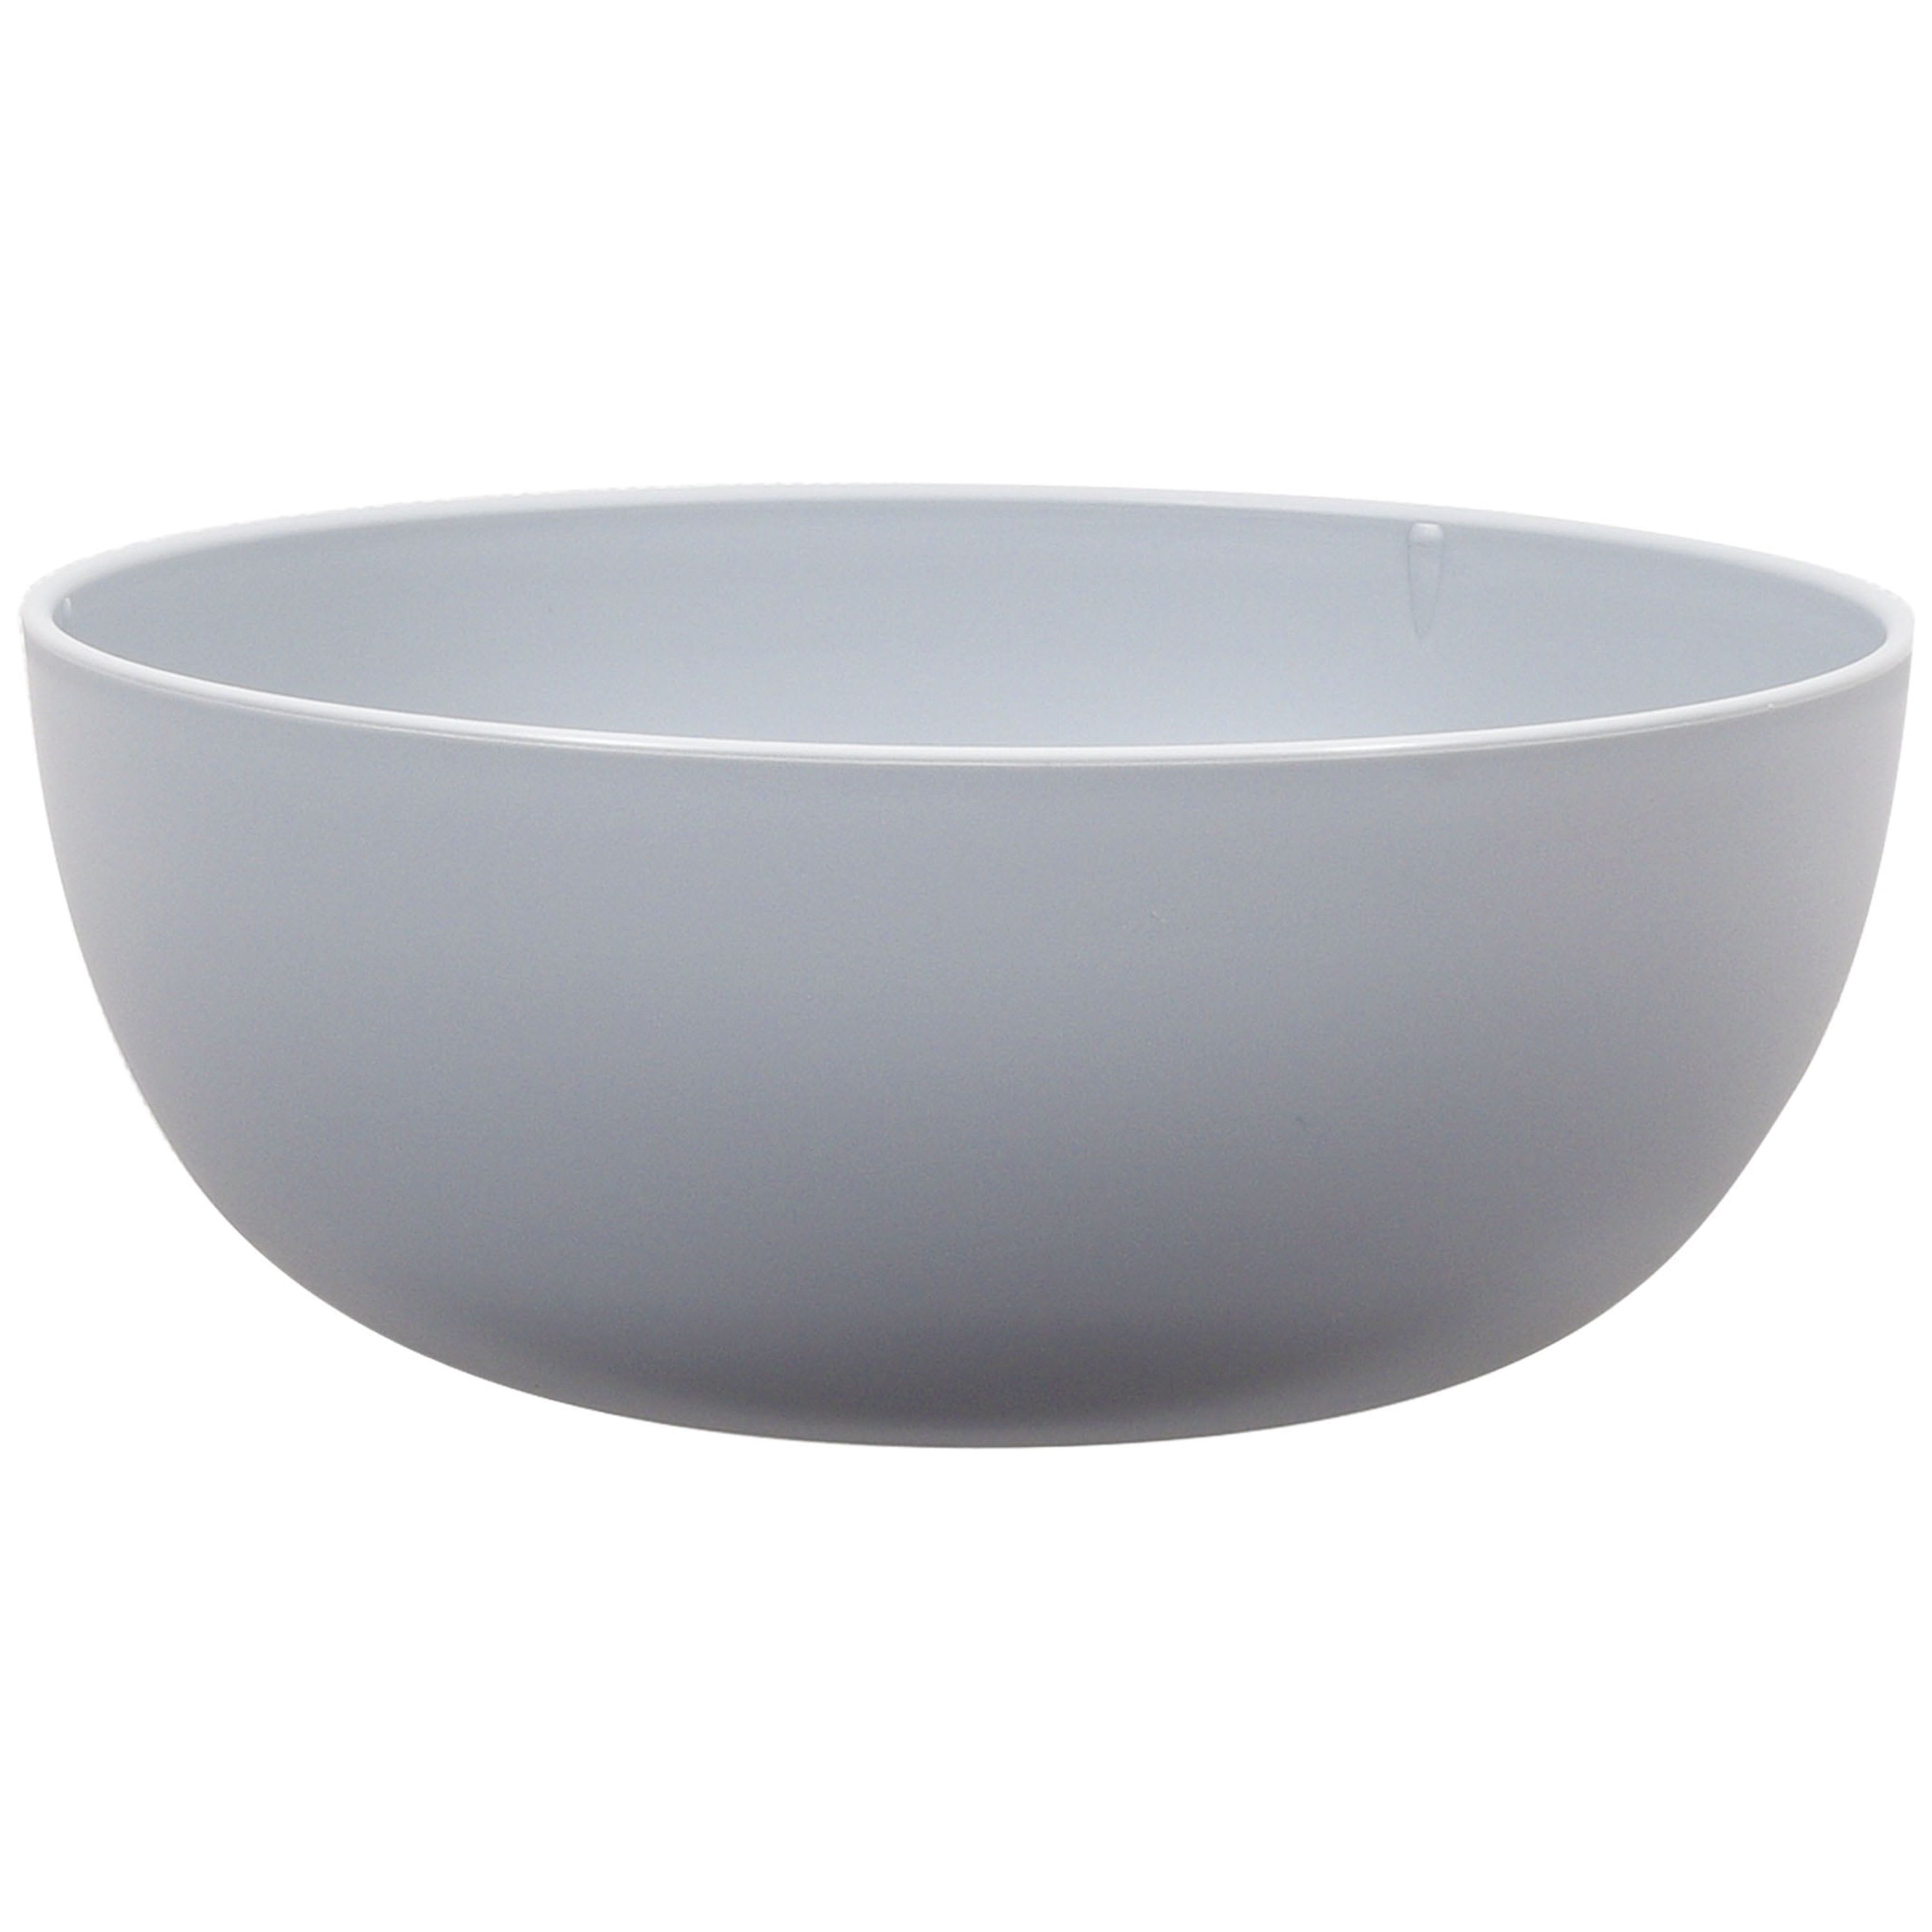 Mainstays - Gray Round Plastic Cereal Bowl, 38-Ounce - image 1 of 4